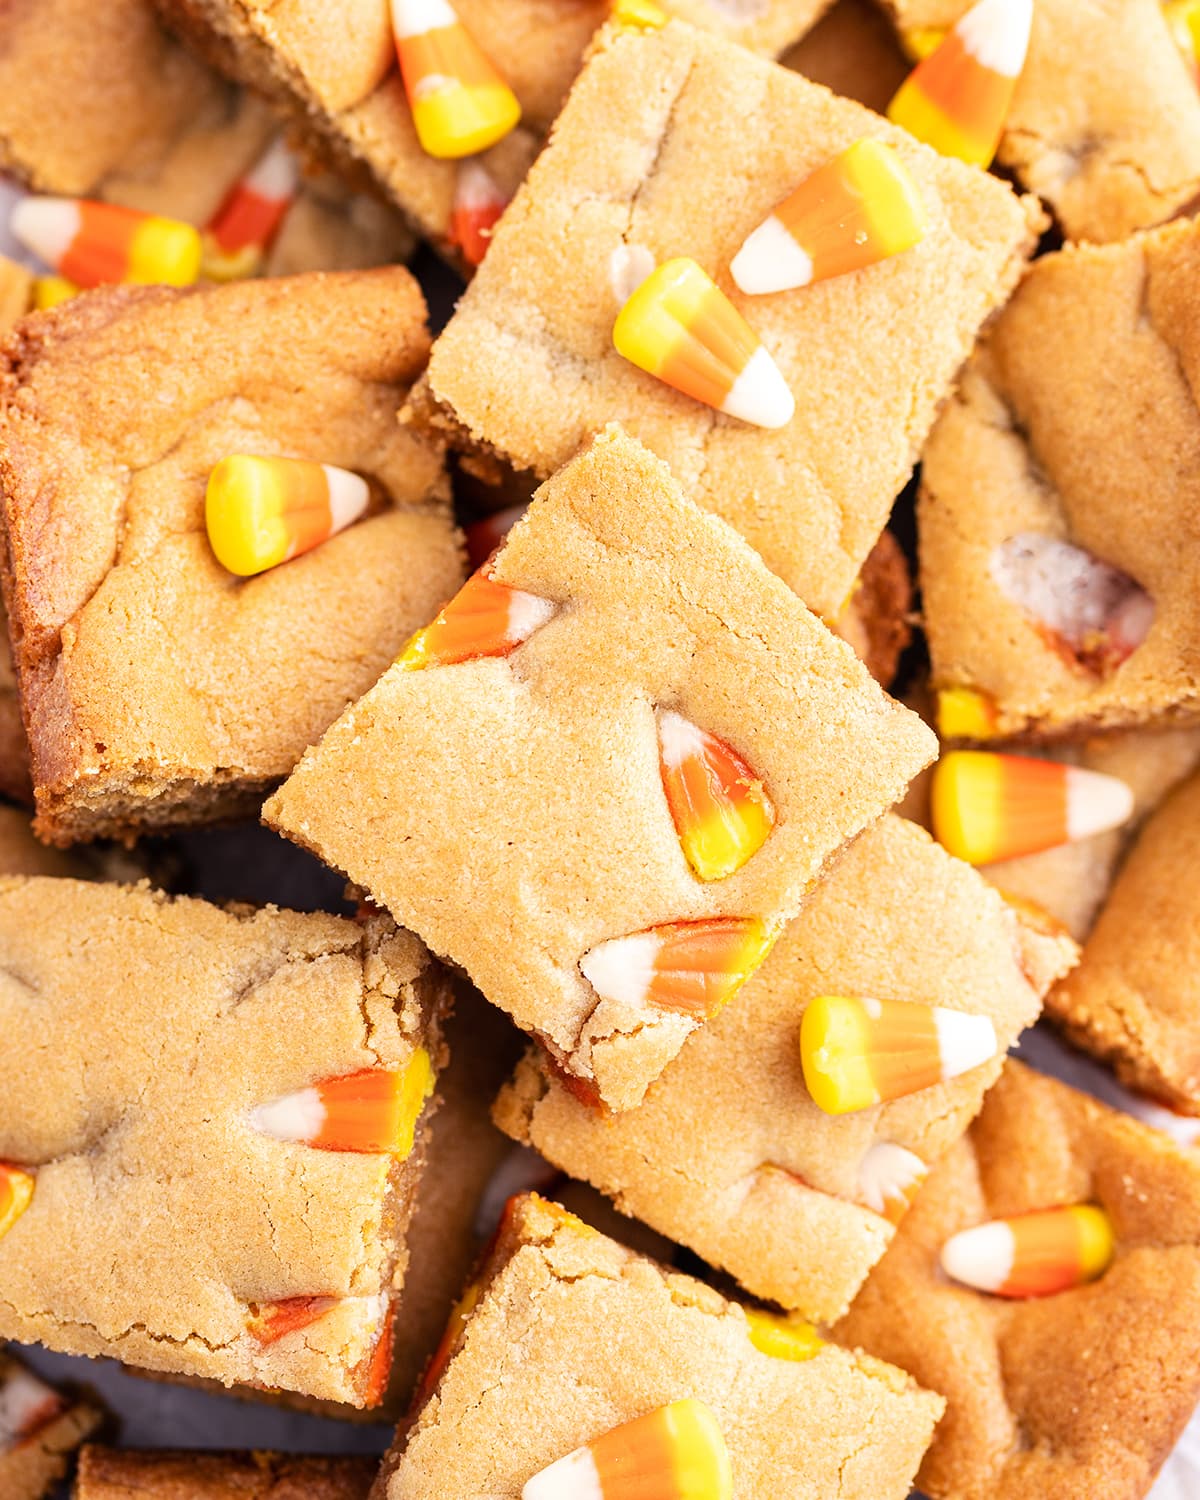 An overhead photo of a pile of peanut butter bar pieces full of candy corns.